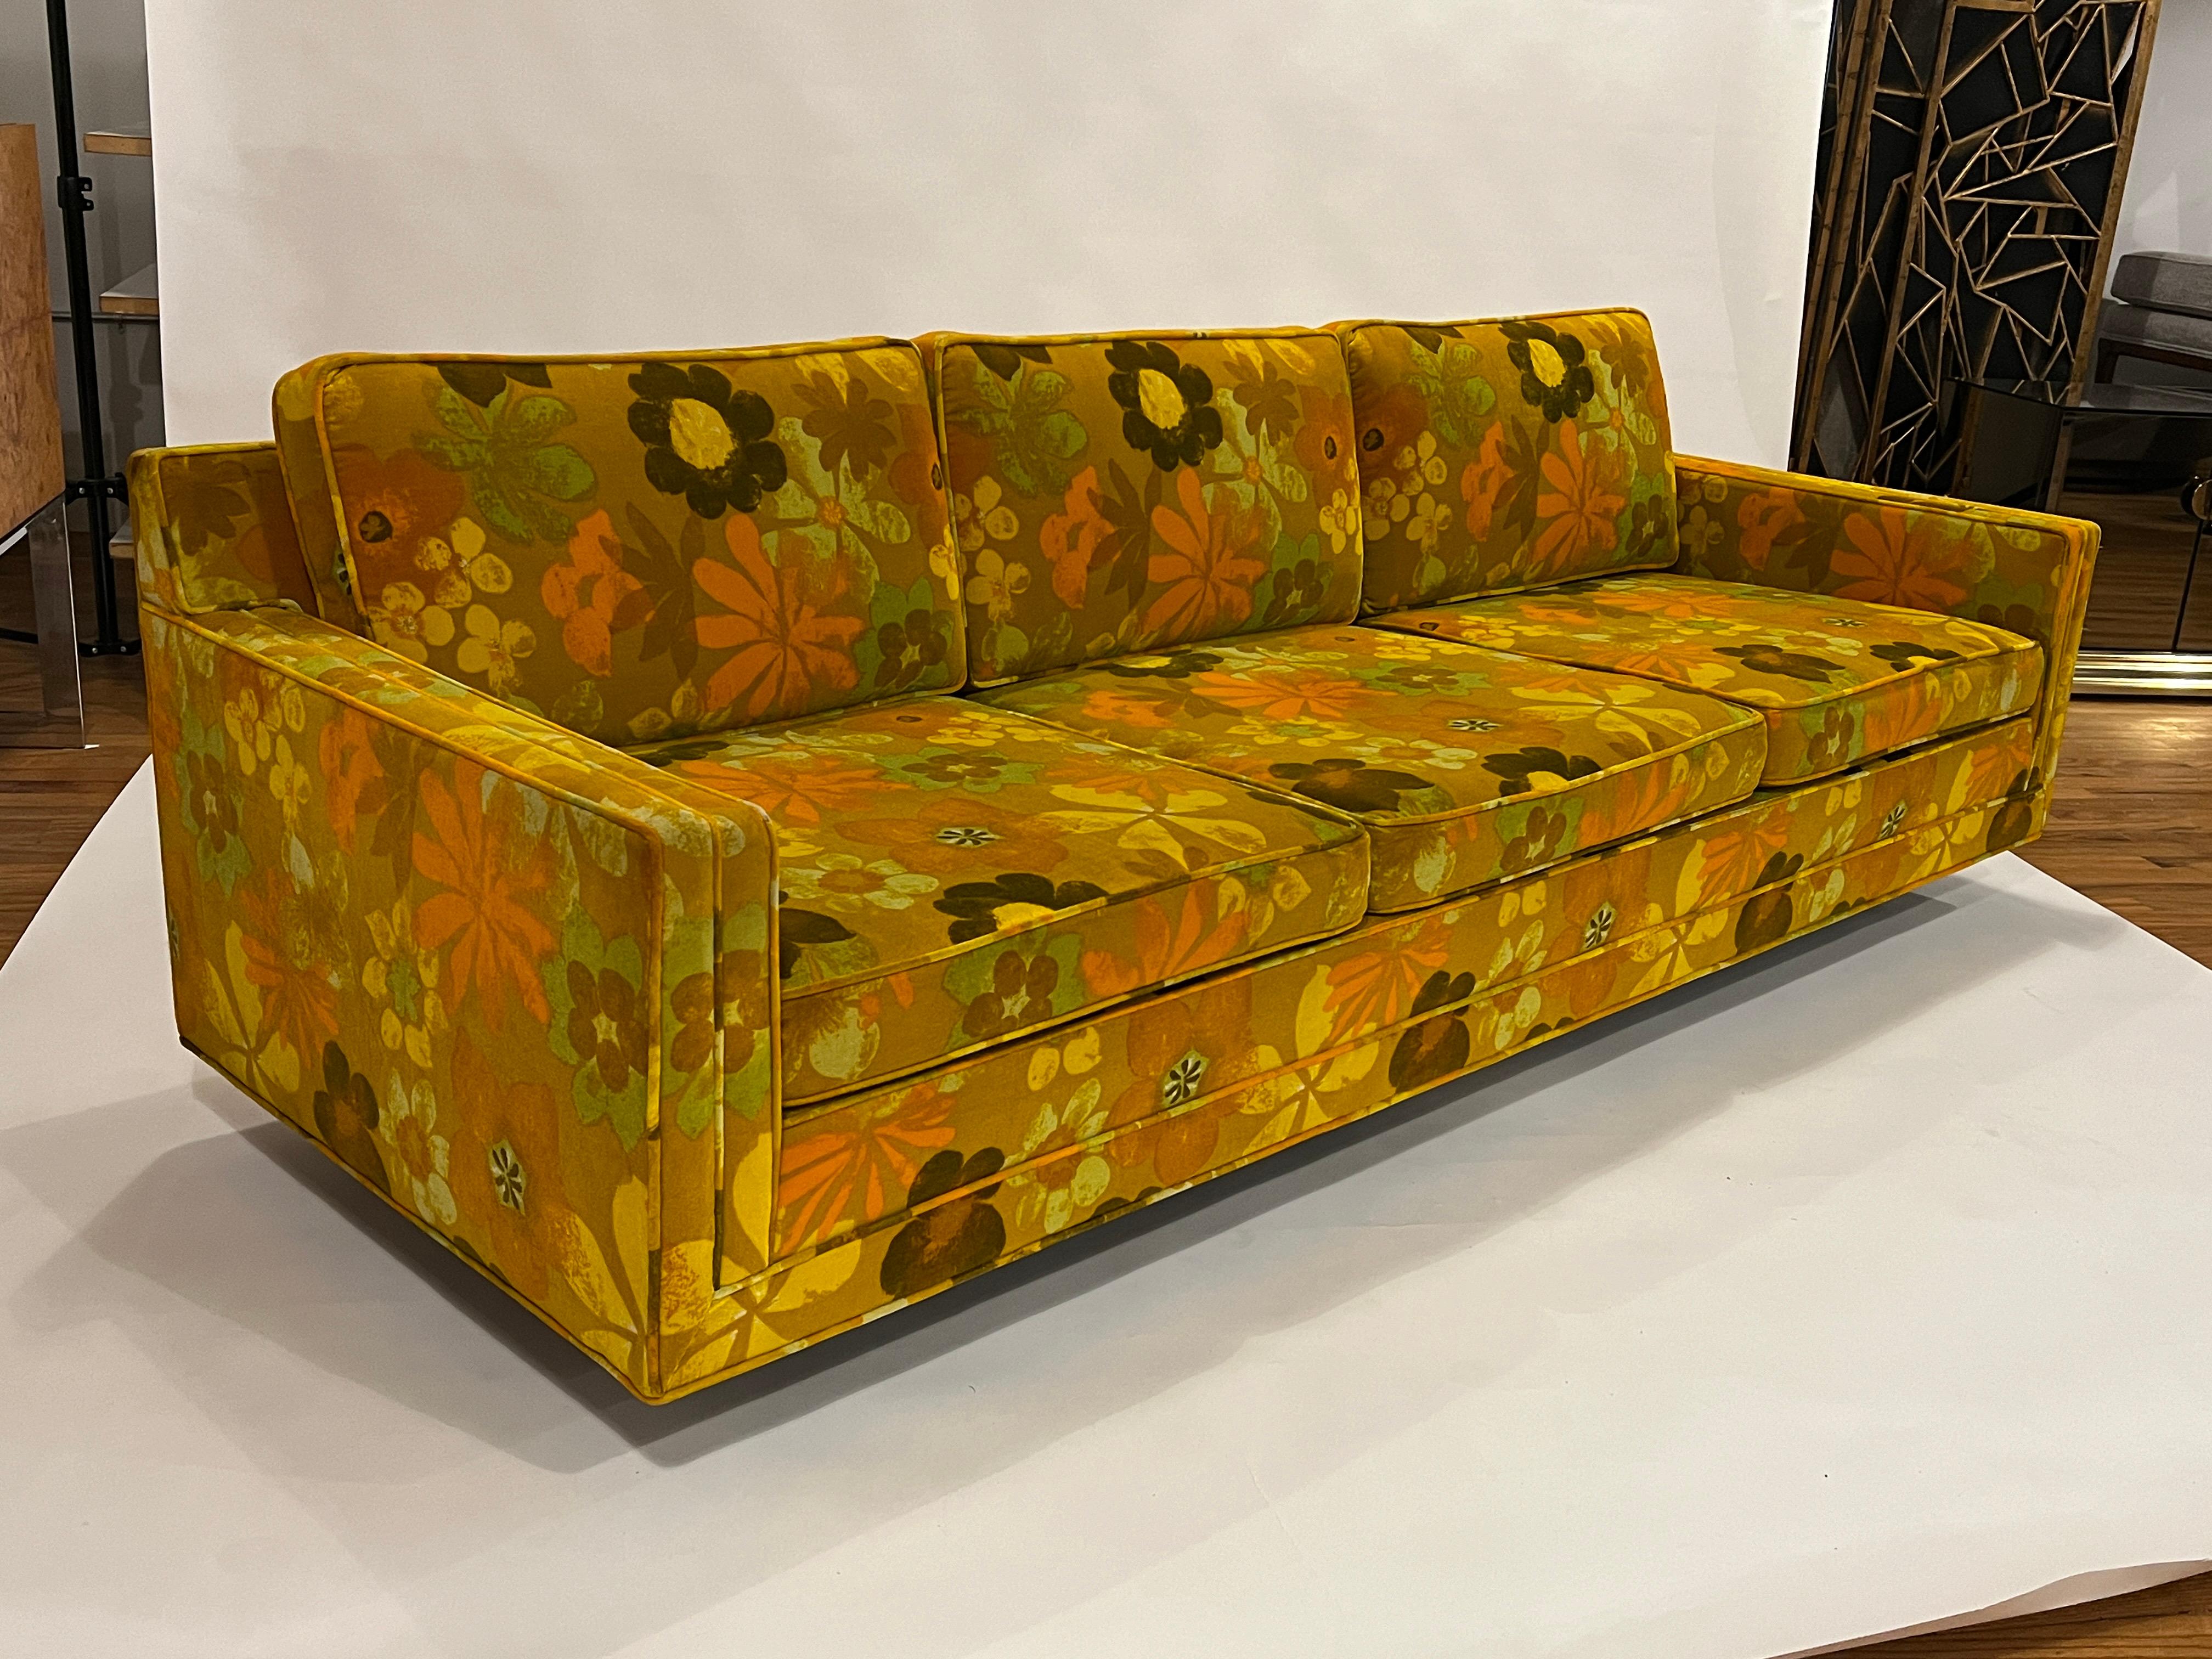 Harvey Probber tuxedo style sofa in original Jack Lenor Larsen green velvet floral upholstery. This sofa is in incredible original condition showing very minimal wear for its age and sits very comfortably with good cushions and spring support. It